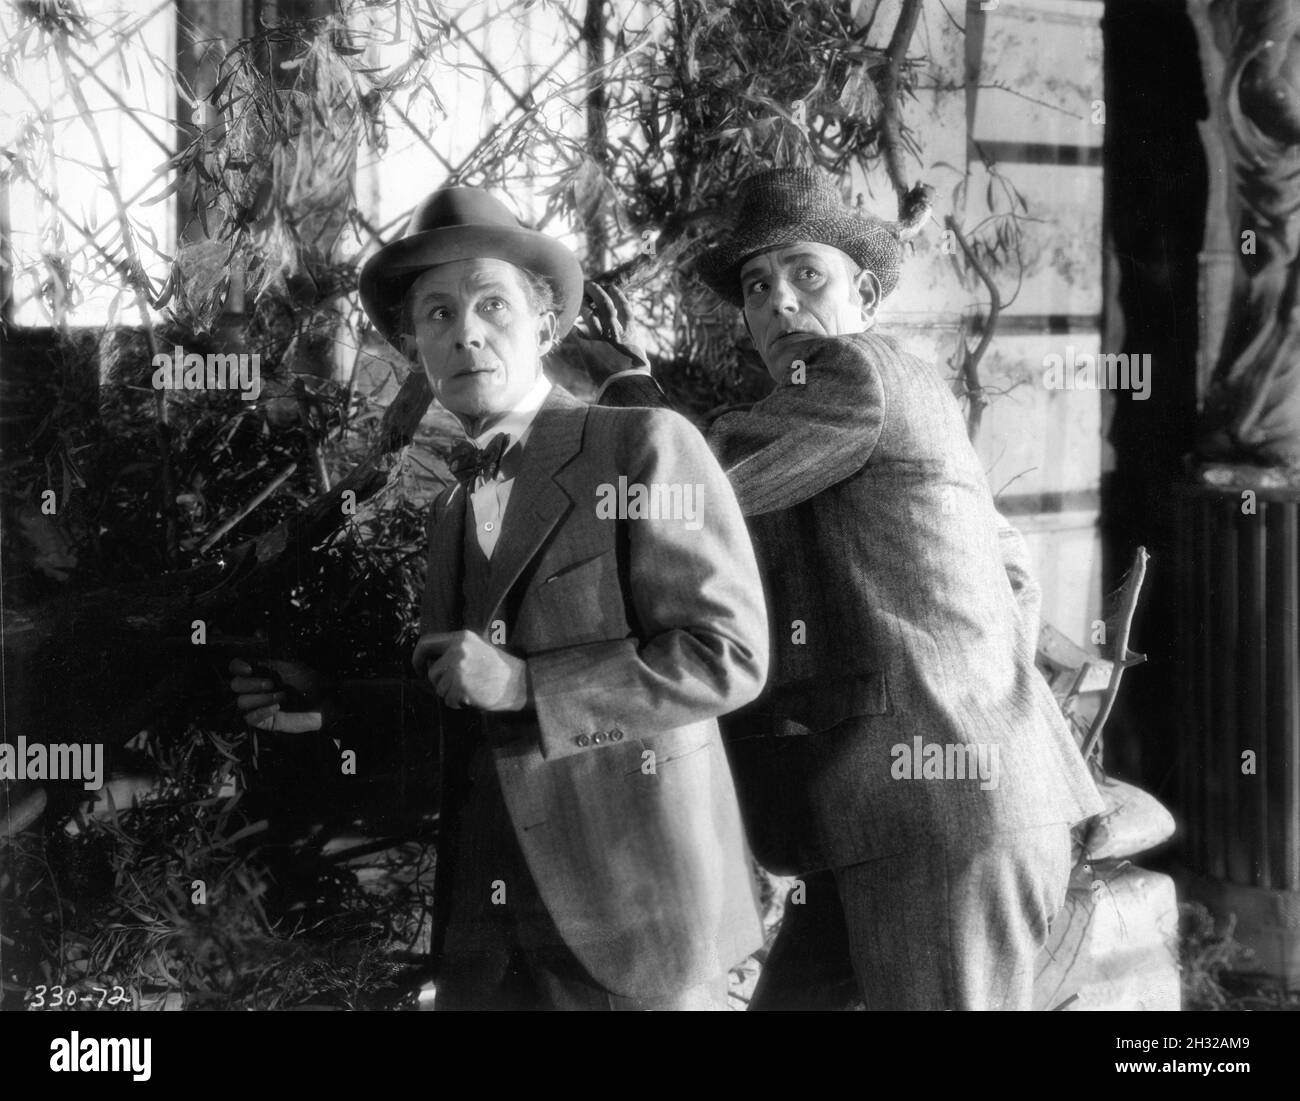 HENRY B. WALTHALL and LON CHANEY in LONDON AFTER MIDNIGHT 1927 director TOD BROWNING story The Hypnotist by Tod Browning scenario Waldemar Young wardrobe Lucia Coulter Metro Goldwyn Mayer Stock Photo